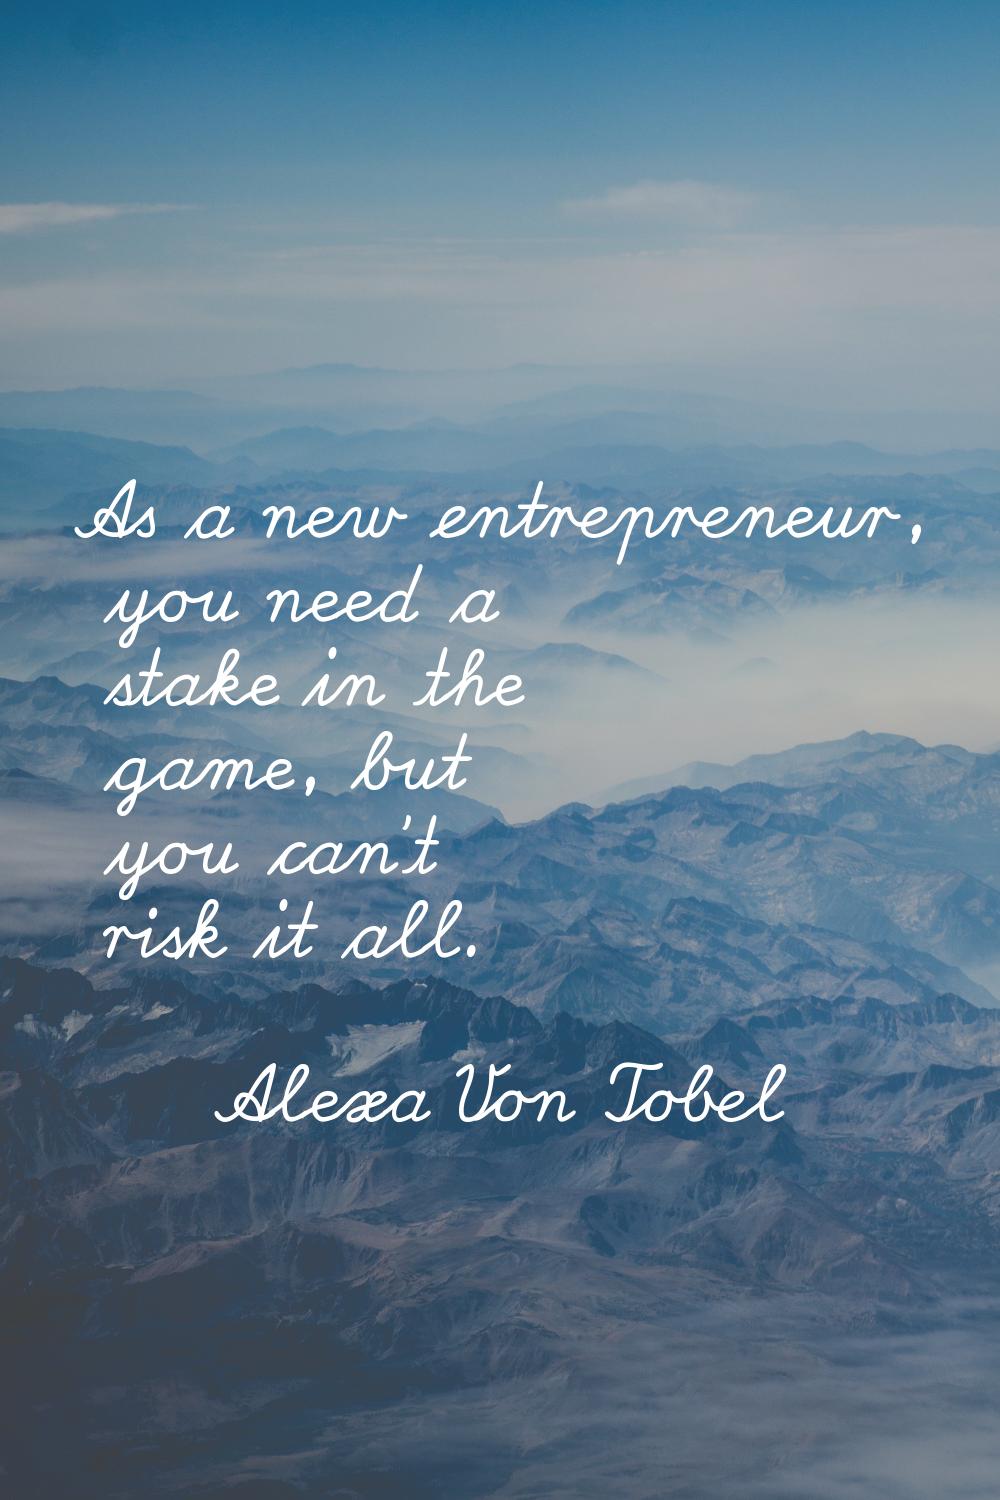 As a new entrepreneur, you need a stake in the game, but you can't risk it all.